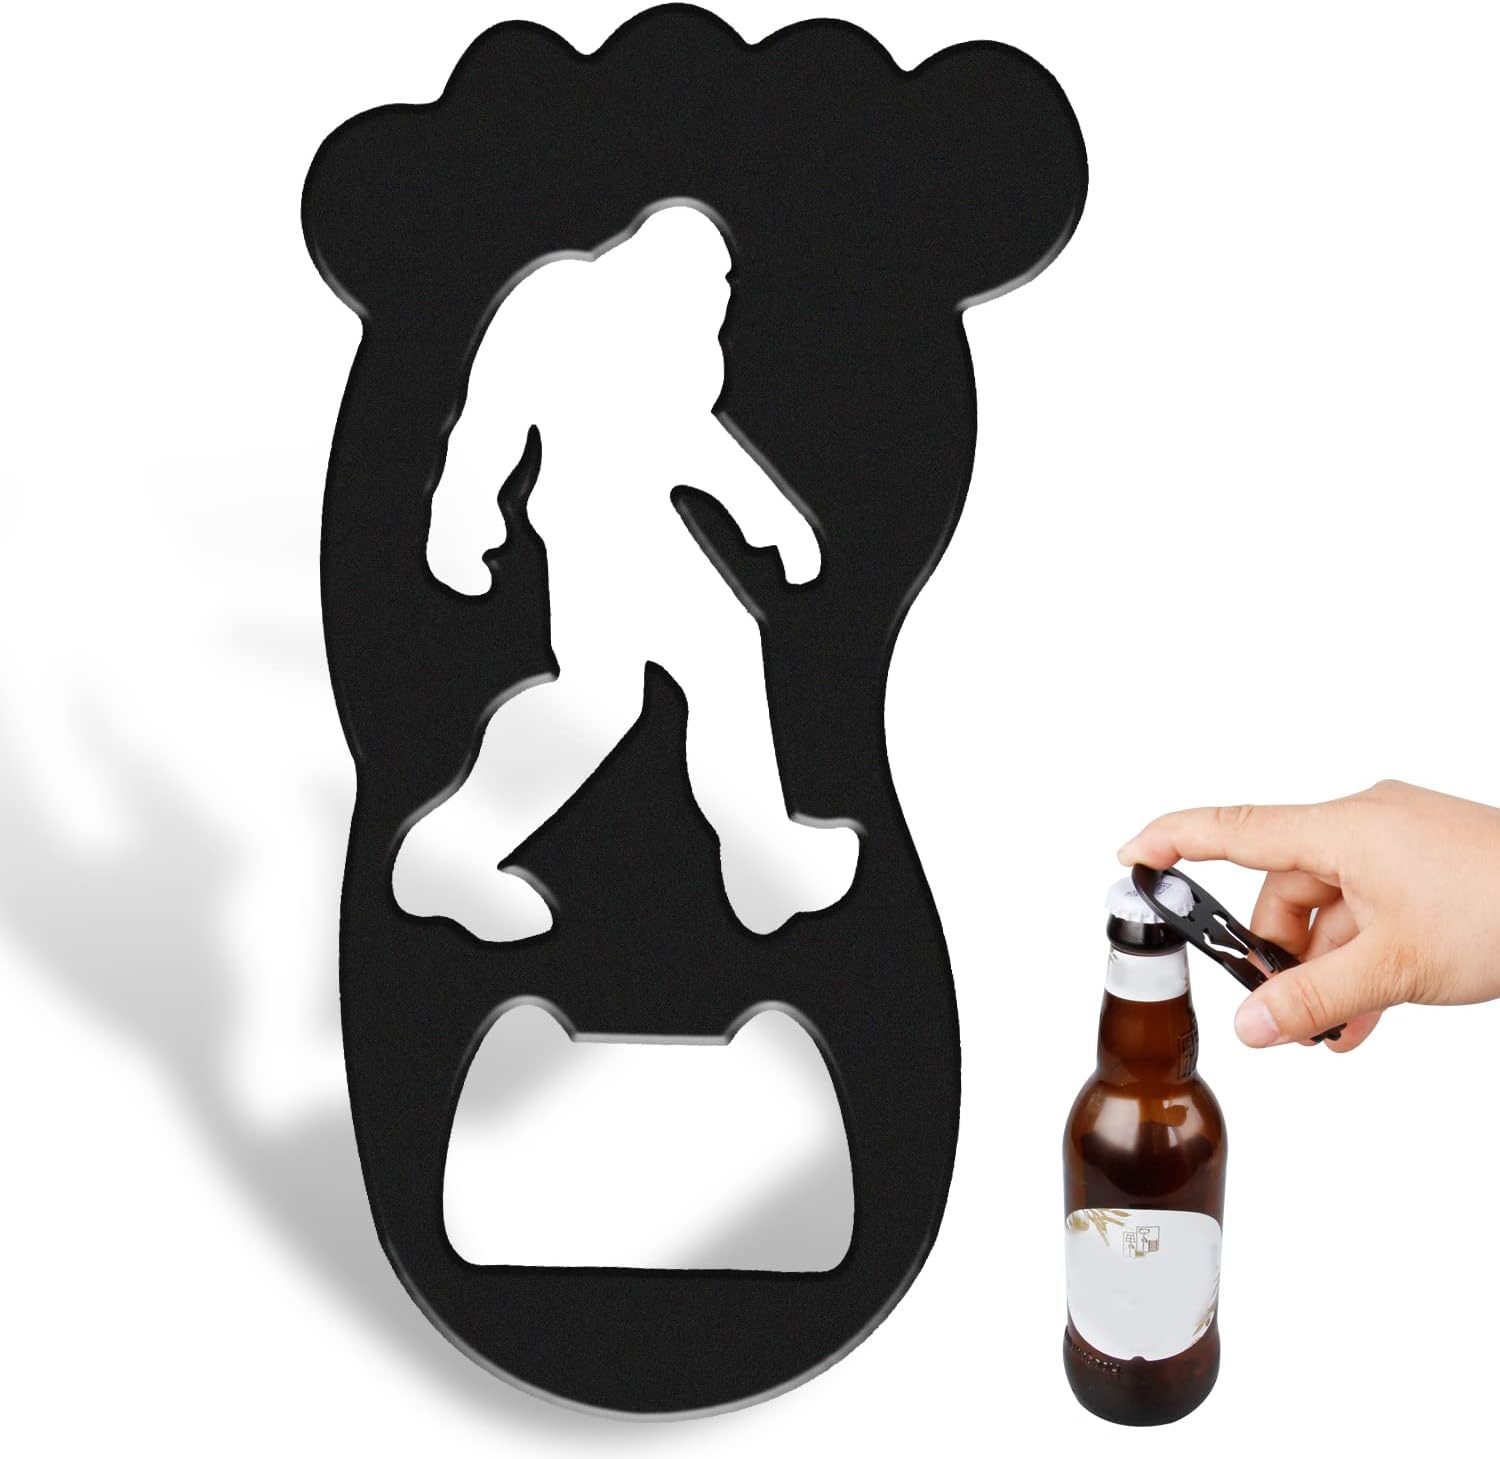 Bottle Opener, Hosrnovo 3.7IN Heavy Duty Flat Bigfoot Beer Bottle Opener Accessories for Home Kitchen Bar and Bartenders, Cool Bigfoot Sasquatch Gifts for Men Dad and Father